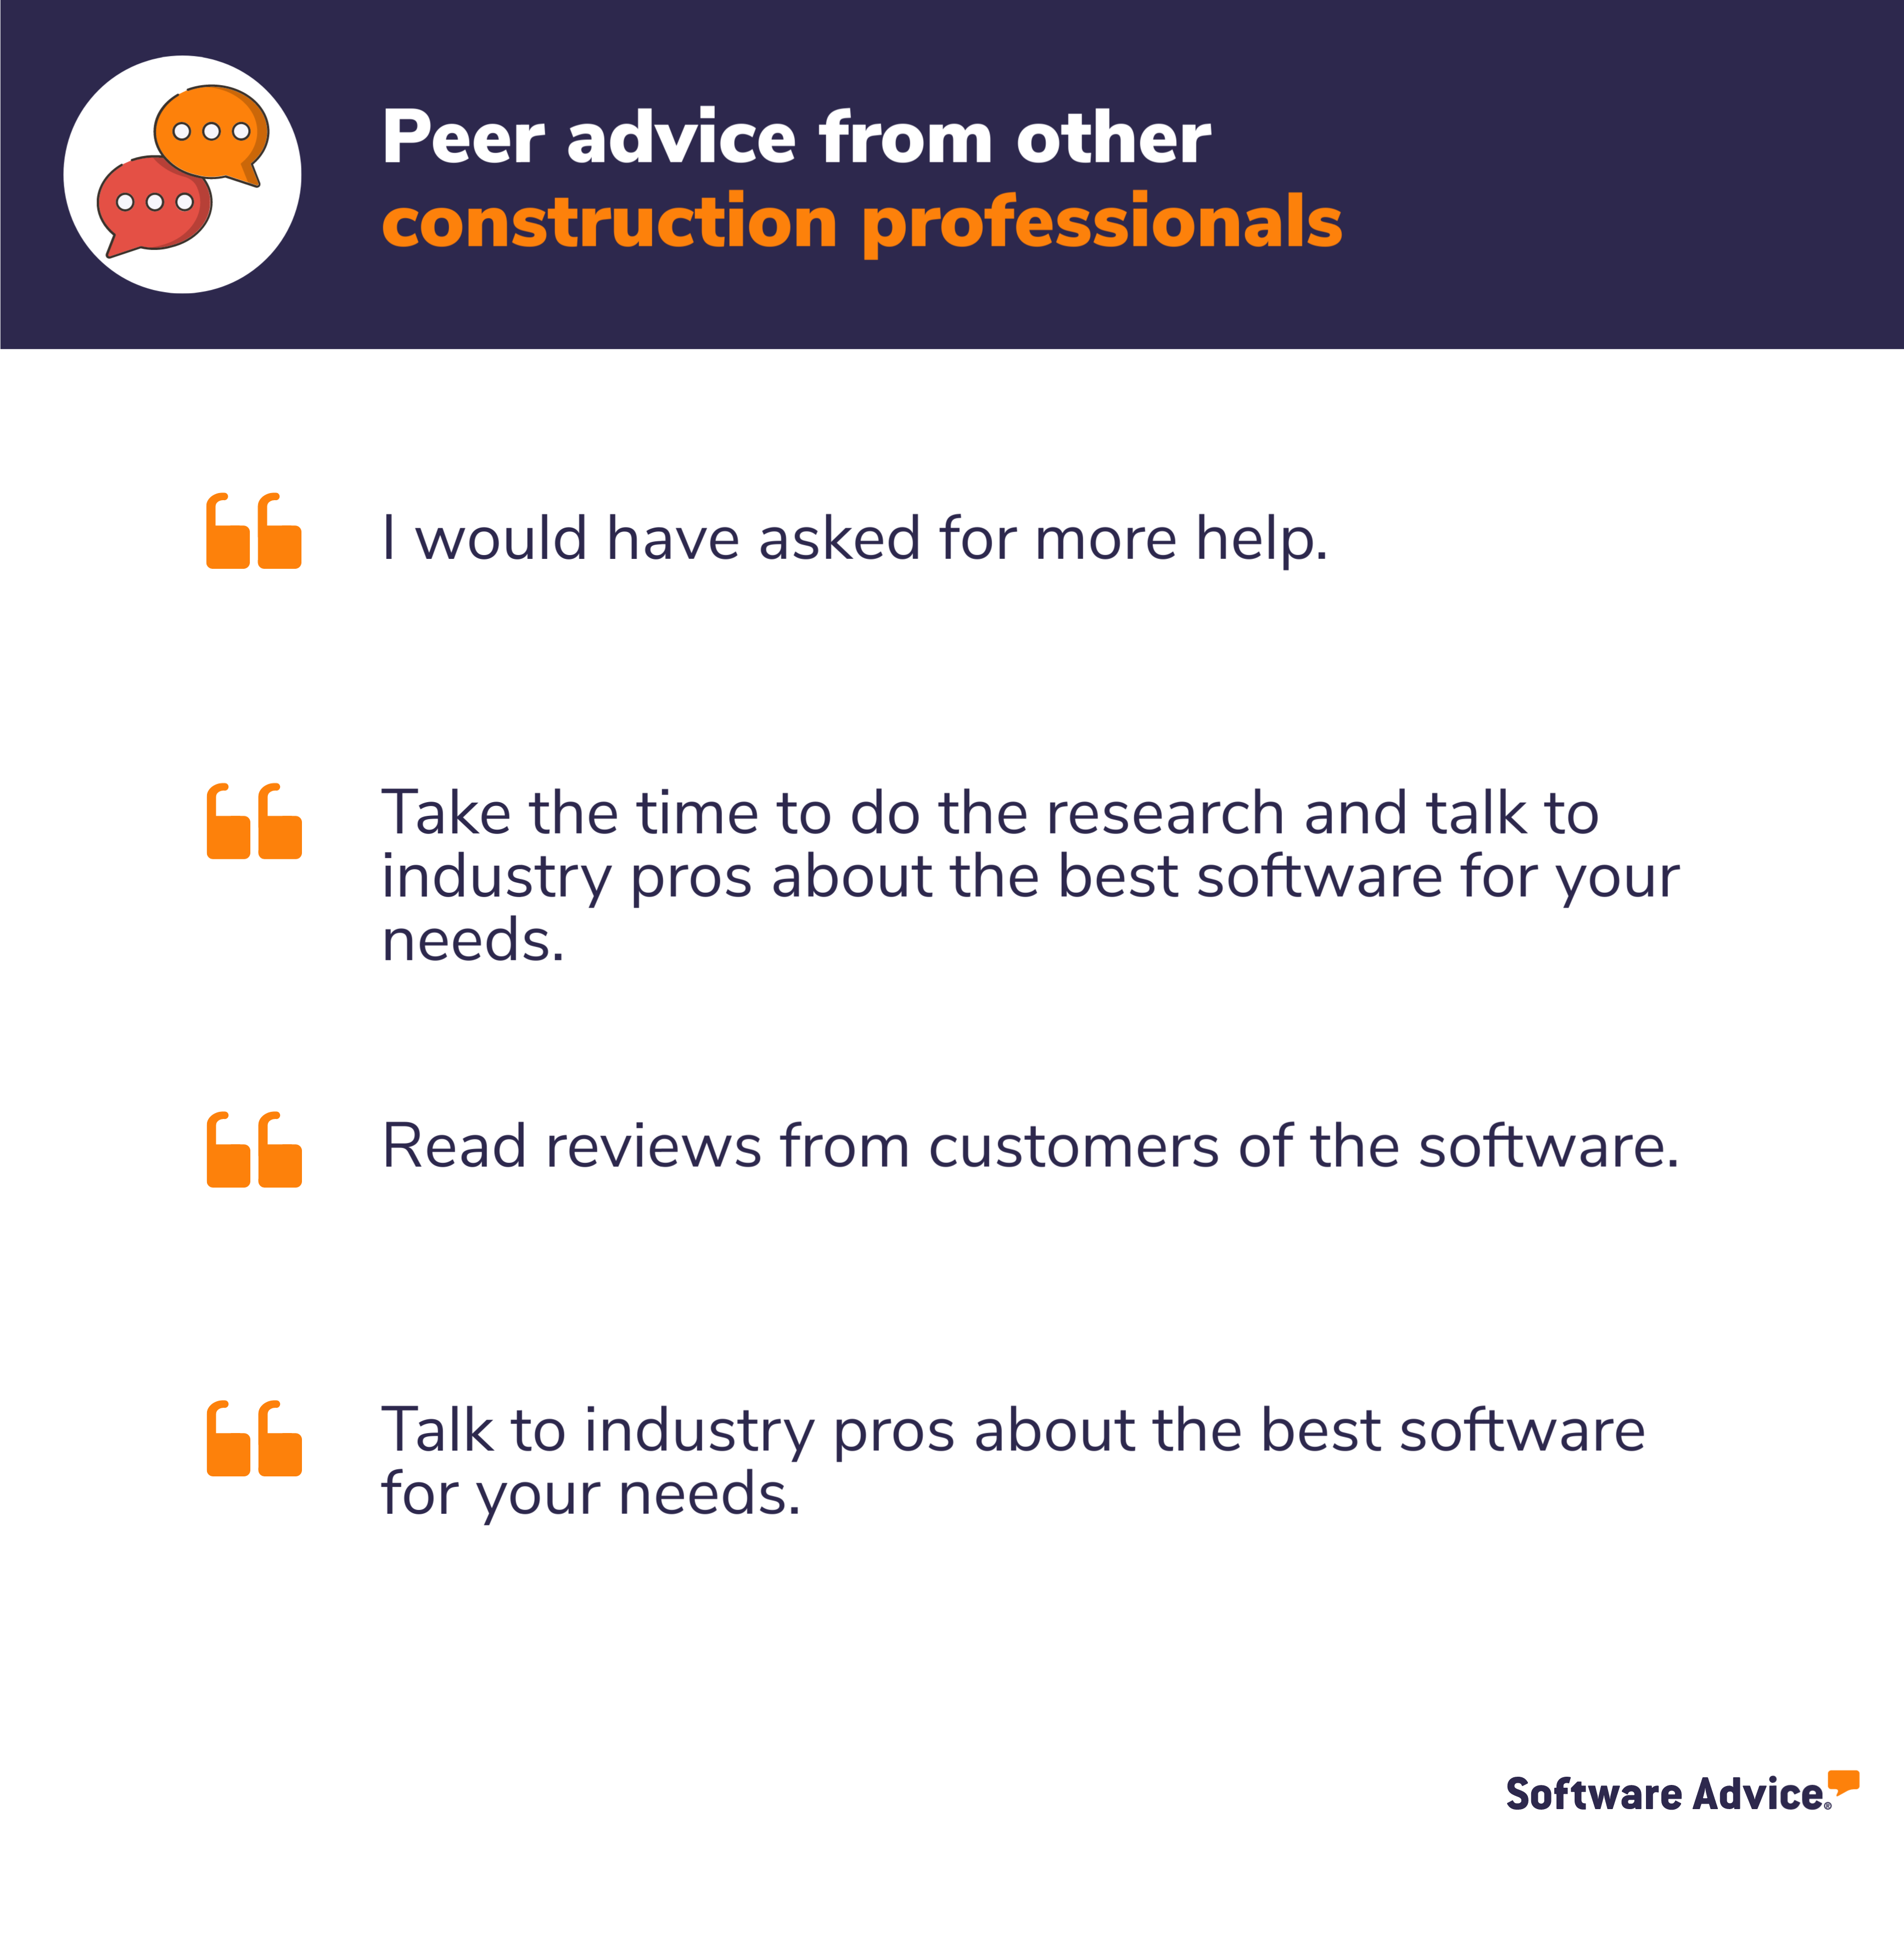 Software Advice graphic: peer advice from construction professionals